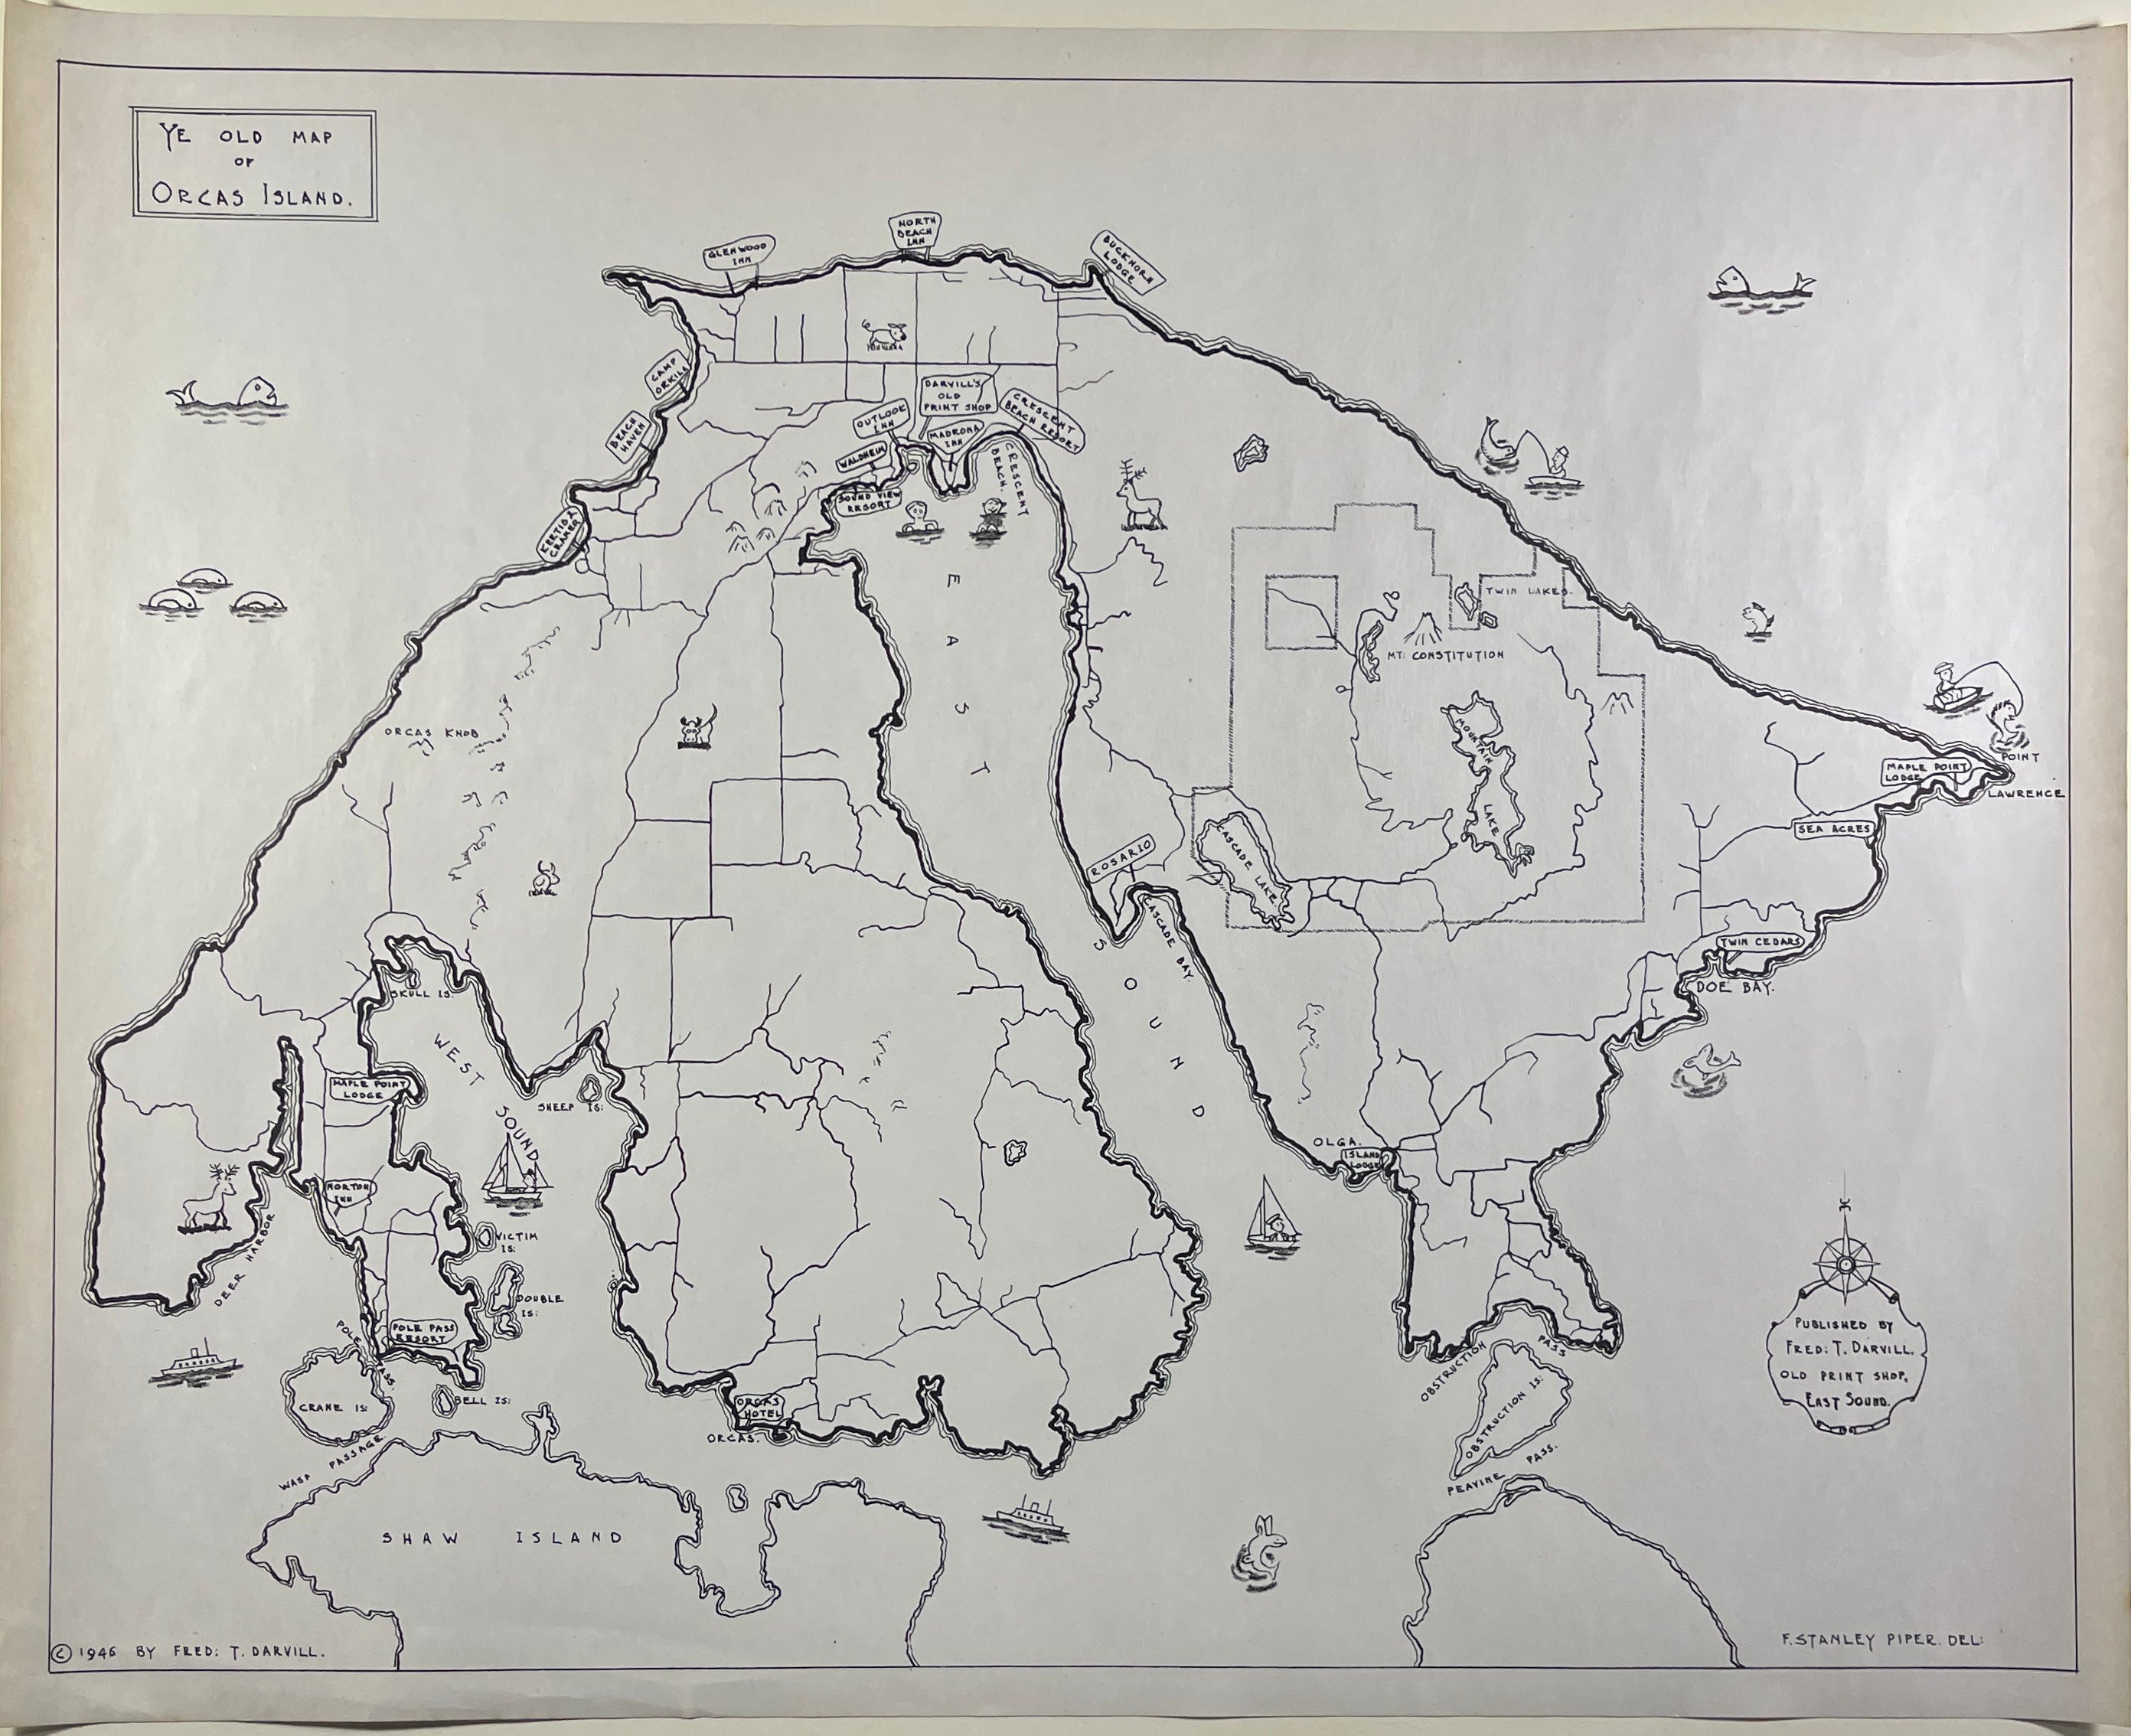 Ye Old Map of Orcas Island 1946 B&W Pictoral Map at Adirondack Retro